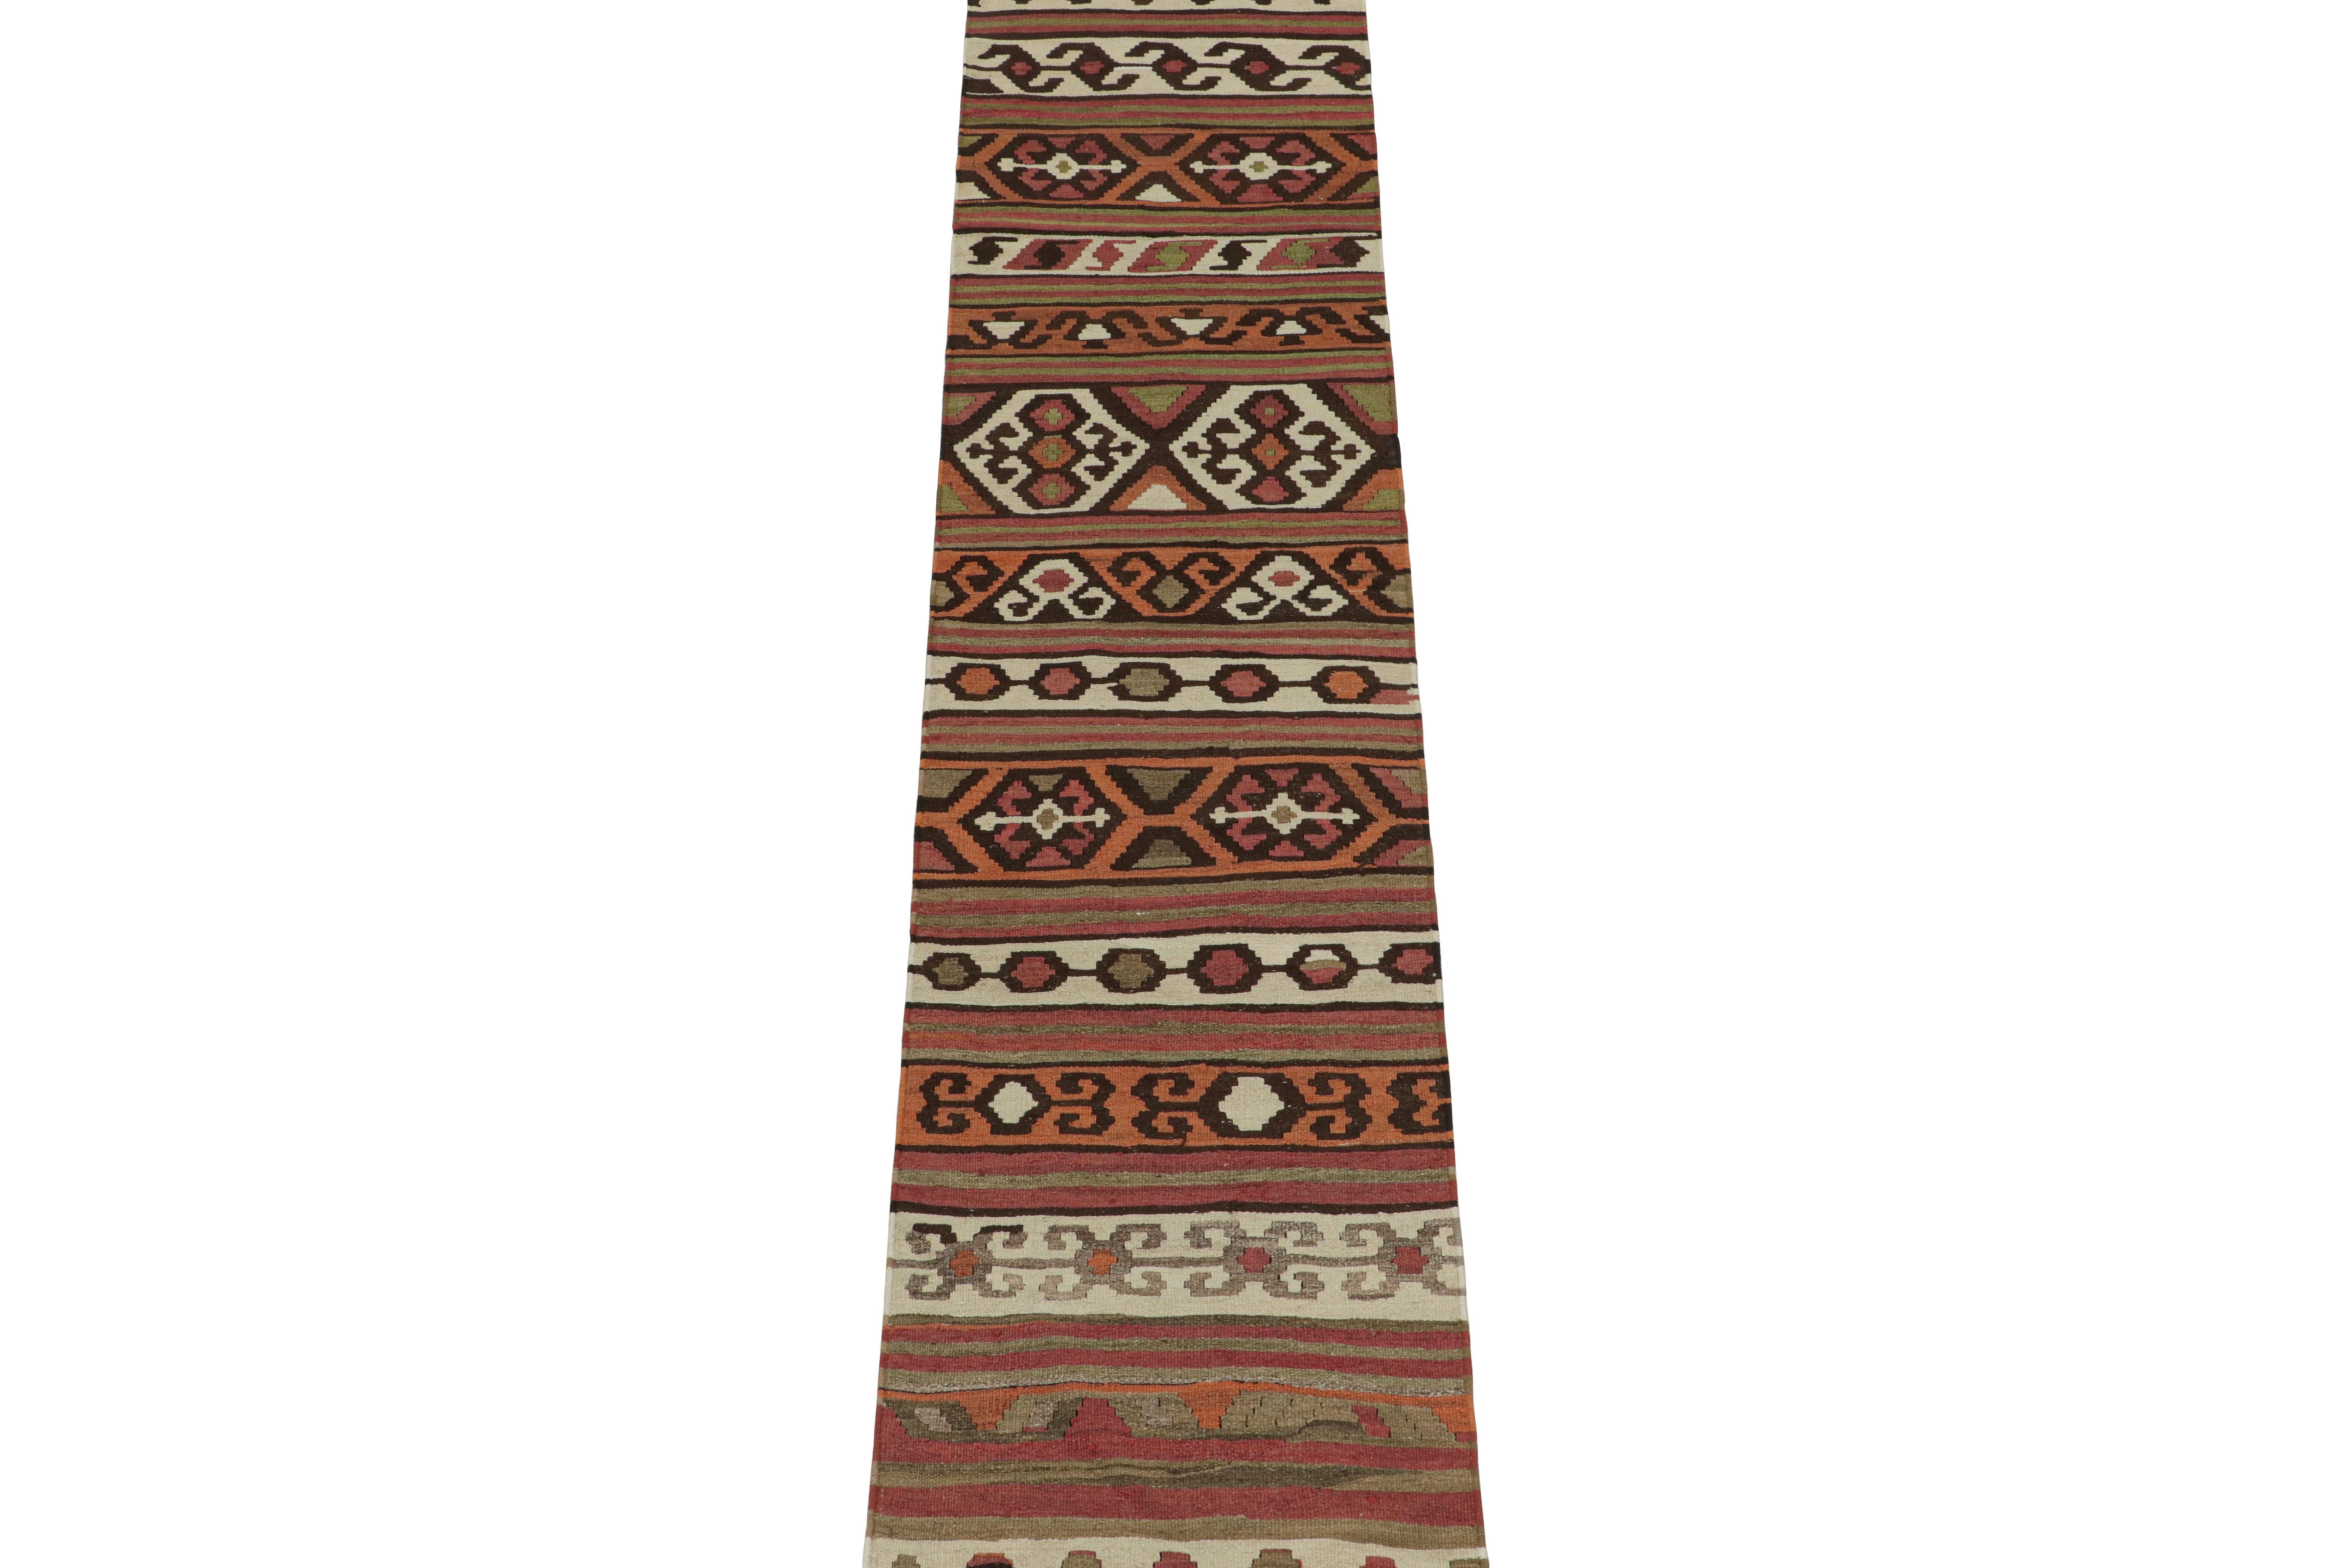 This vintage 2x11 Persian Kilim runner is believed to be a Shahsavan tribal rug. Handwoven in wool, it originates circa 1950-1960 and enjoys an interesting polychromatic design in geometric patterns.

Further on the Design:

Among many warm reds